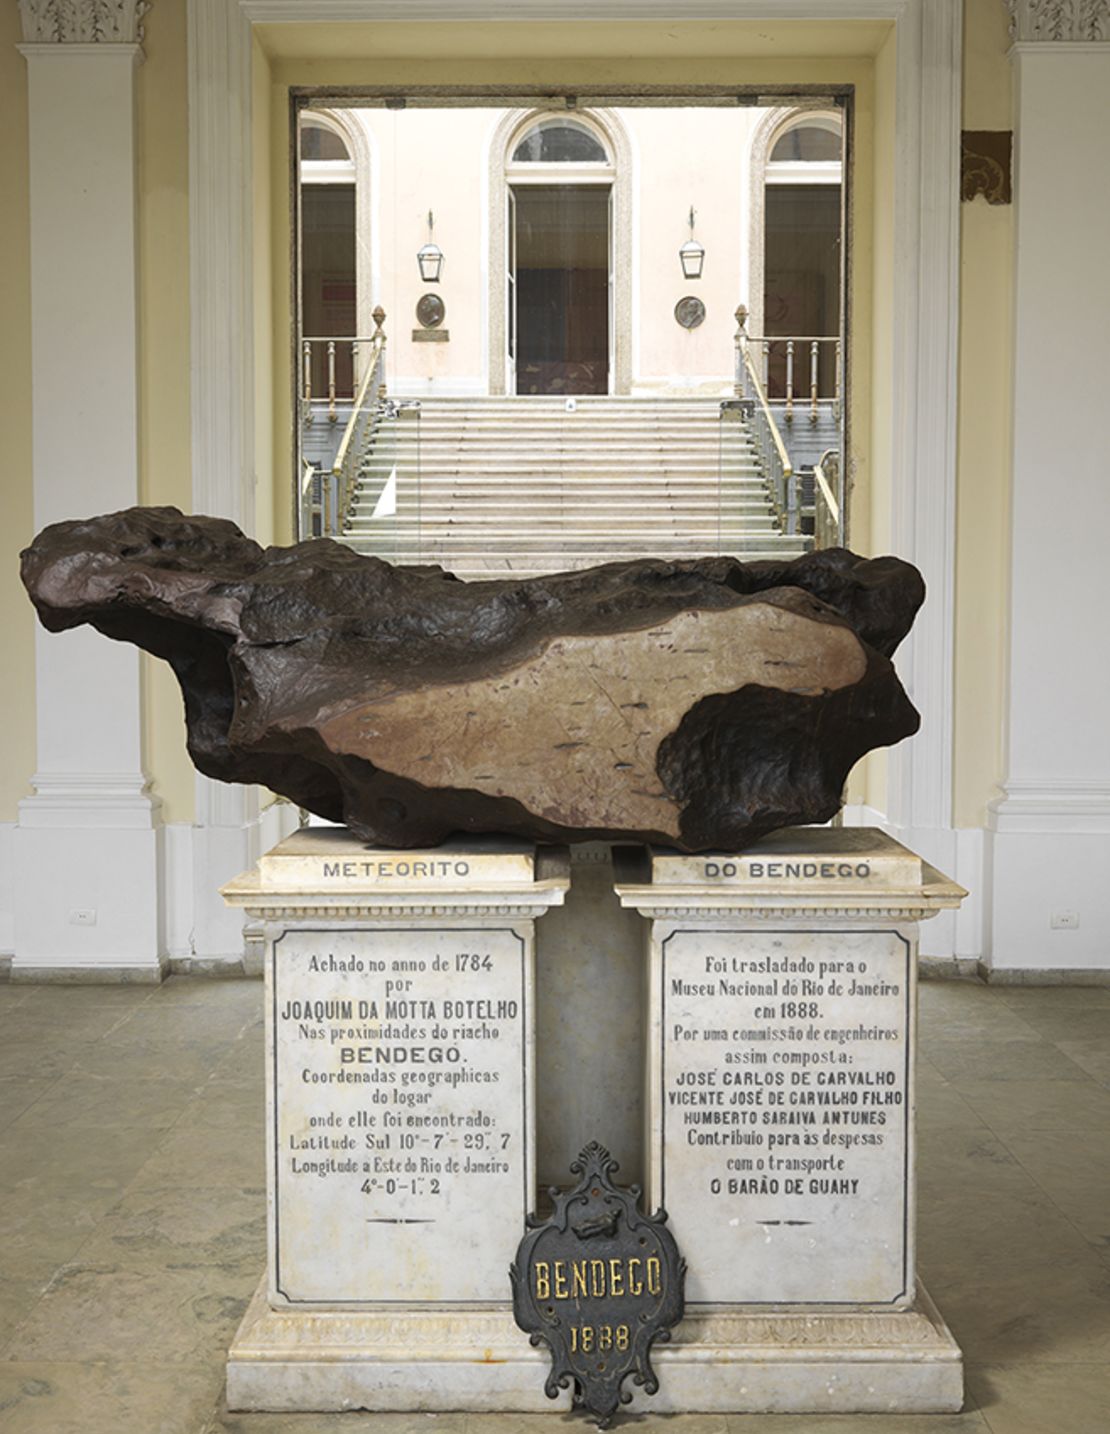 One of the world's largest meteorites, on display at the museum since 1888.